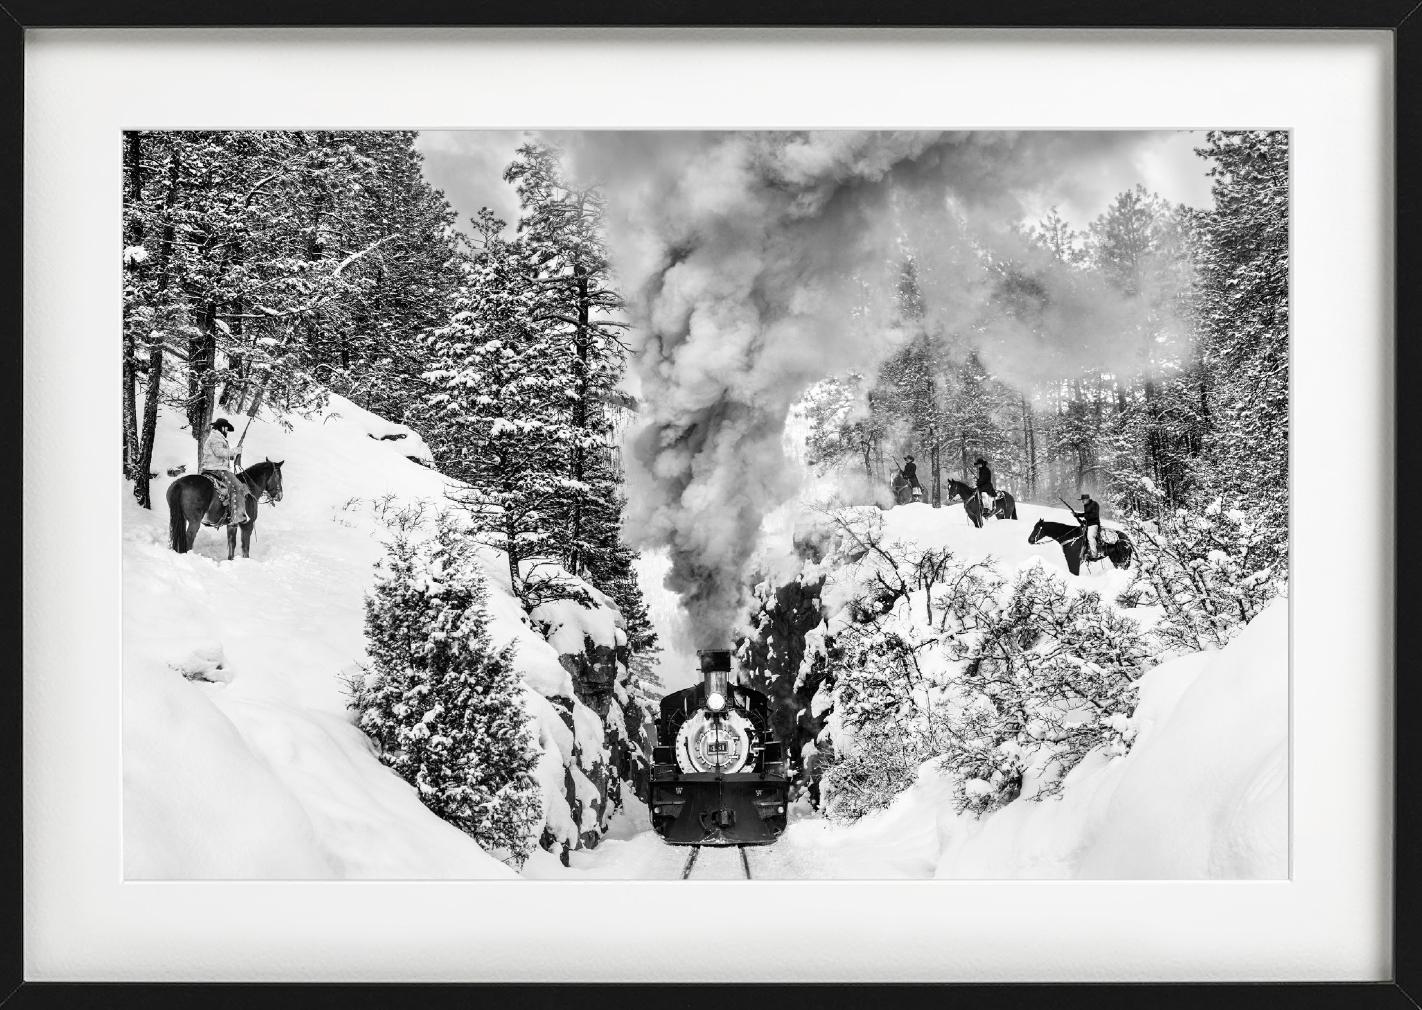 All prints are limited edition. Available in multiple sizes. High-end framing on request.

All prints are done and signed by the artist. The collector receives an additional certificate of authenticity from the gallery.

'Outlaws' by David Yarrow